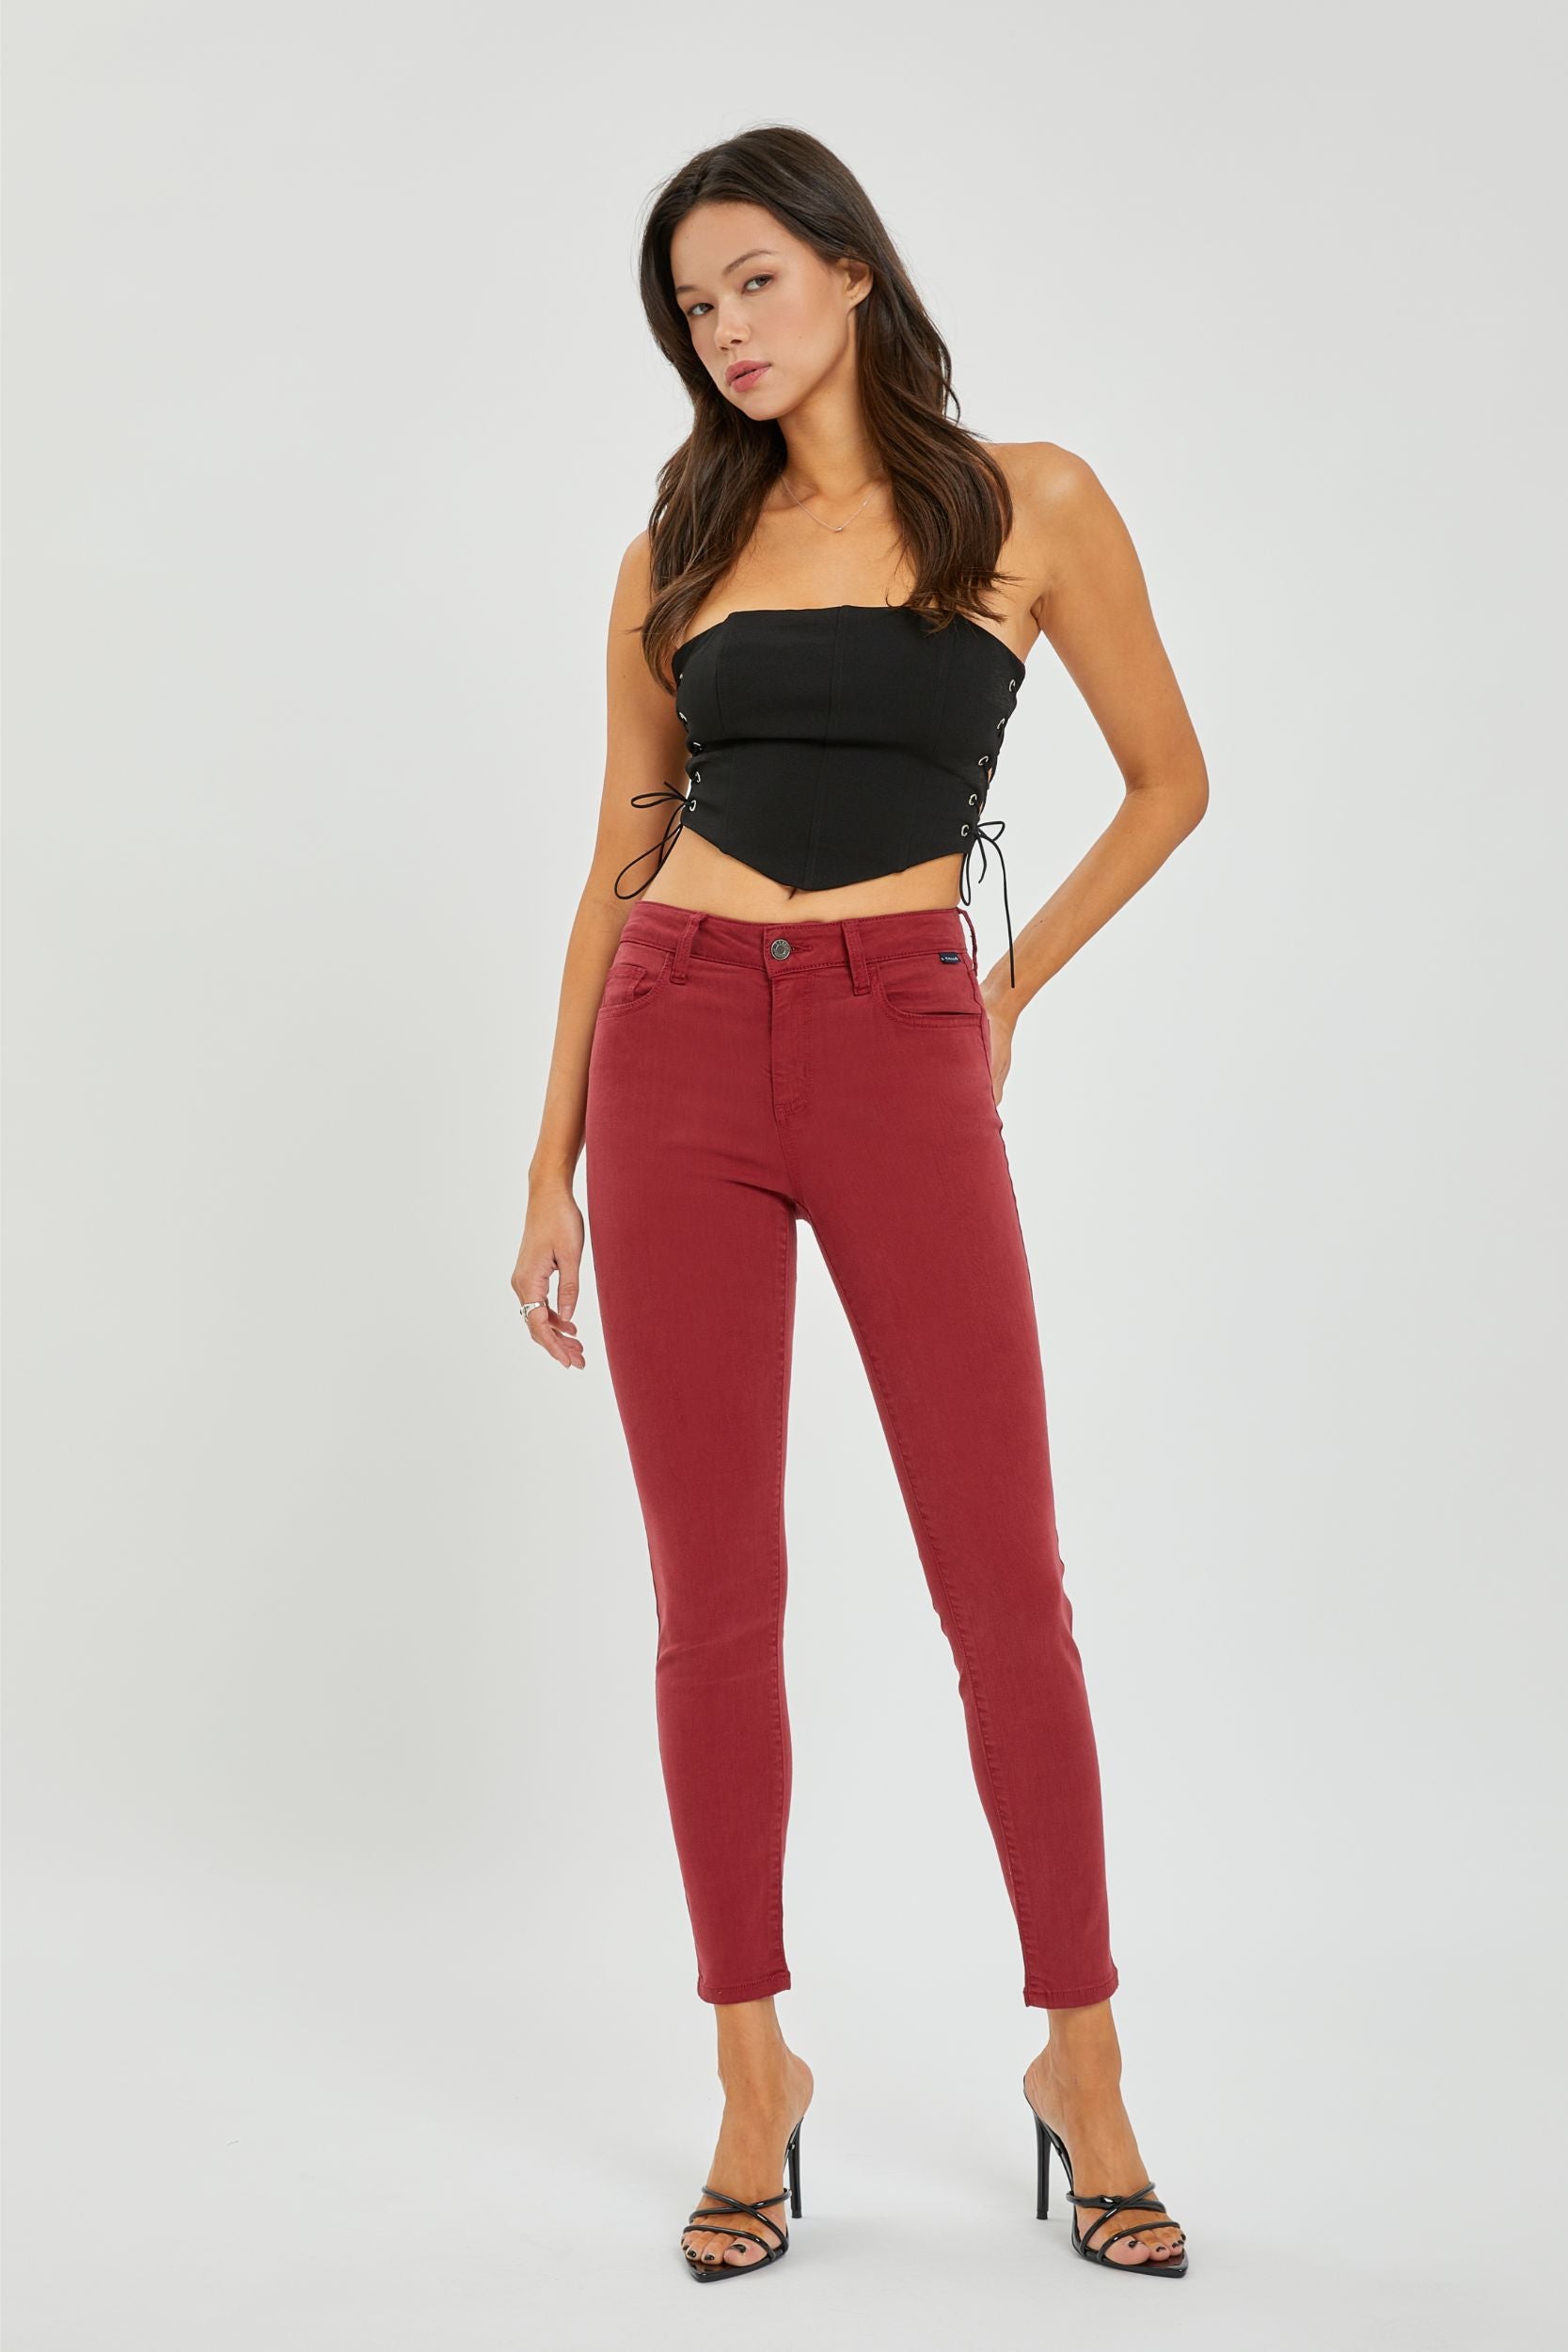 Red, Red Wine Skinny Jeans